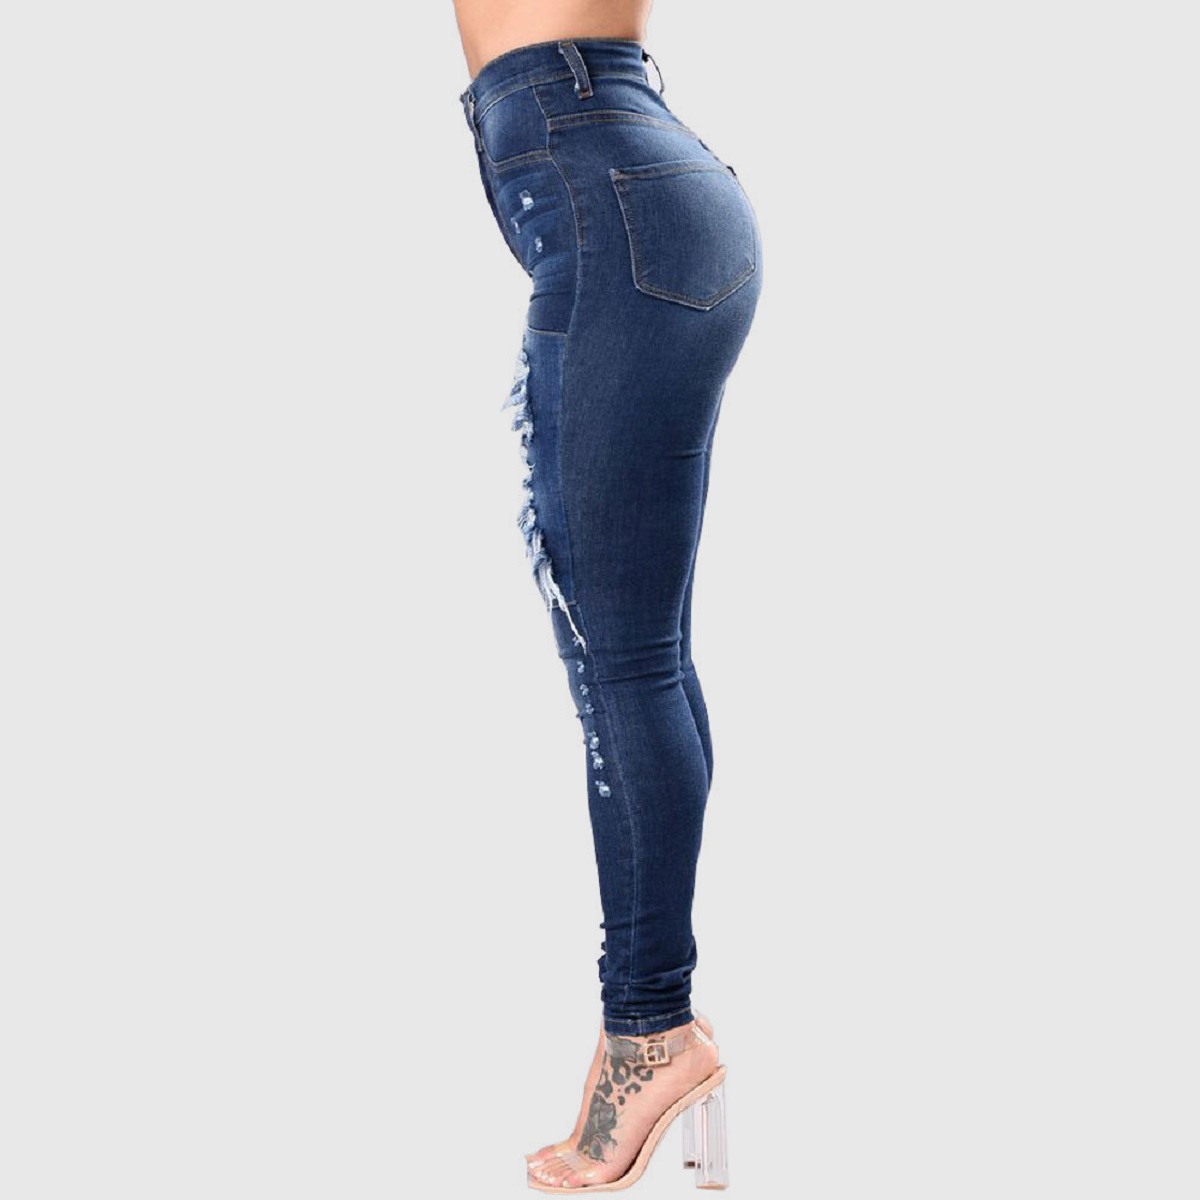 High Rise Distressed Jeans Blue Jeans ripped stretch denim tight fitting  jeans